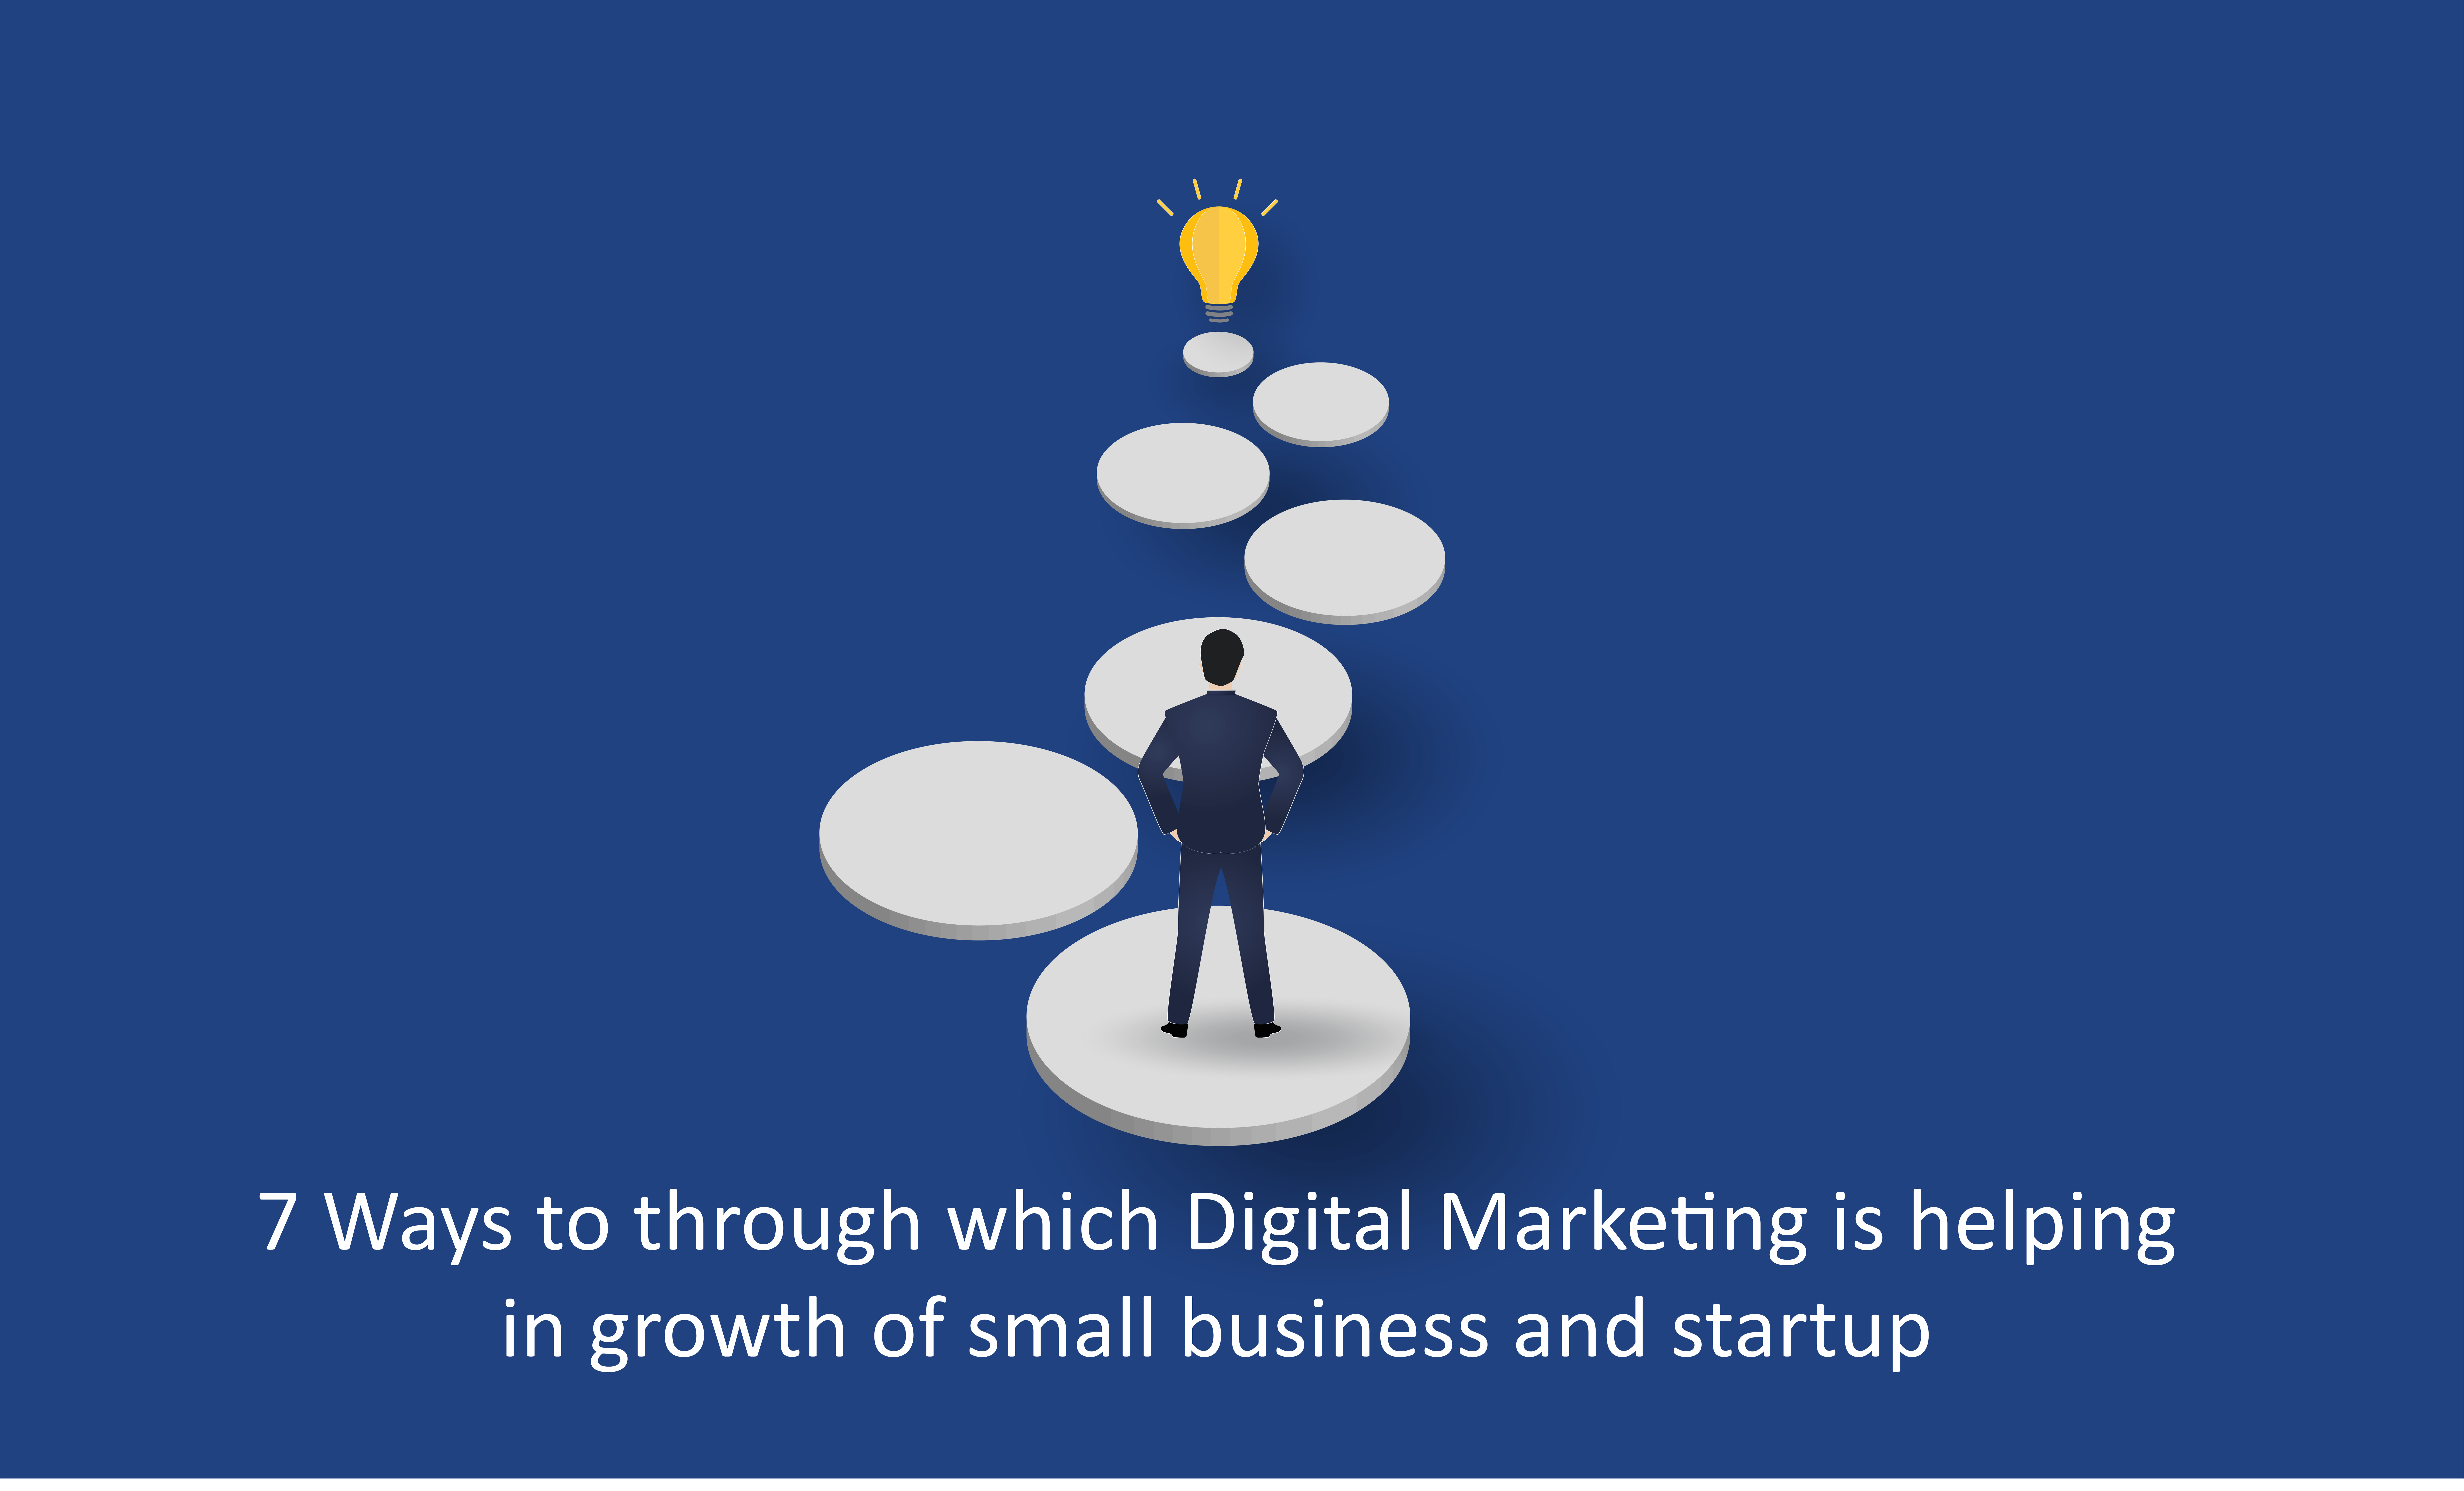 Top 7 ways through which Digital Marketing is helping in the growth of Small Businesses and Start-Ups